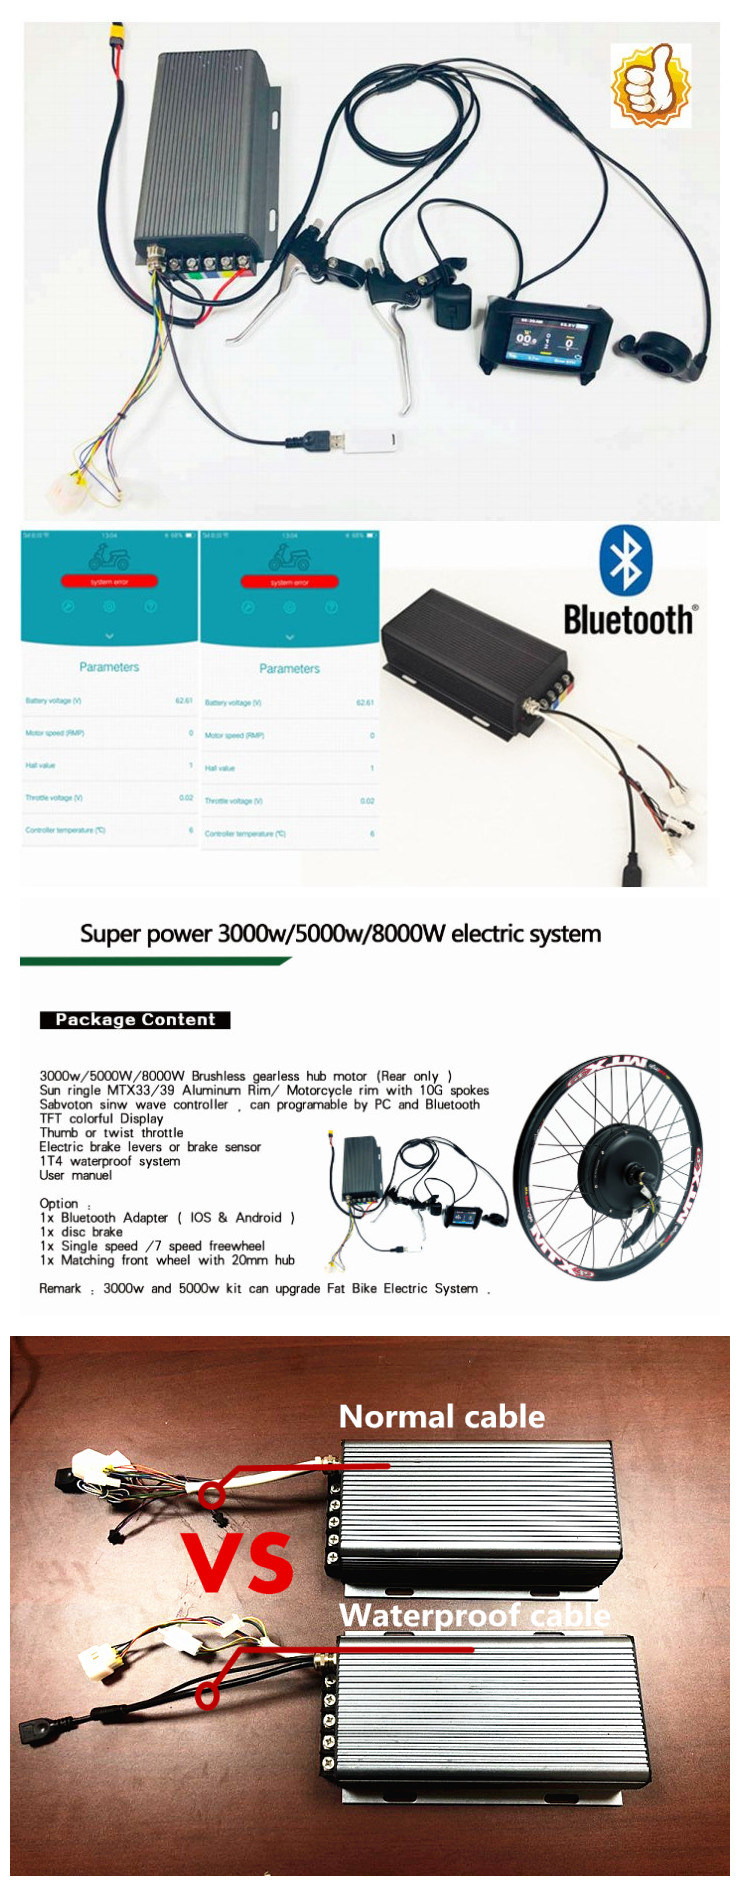 Electric Bicycle Motorcycle Engine Accessories with Bluetooth QS 273 8000W